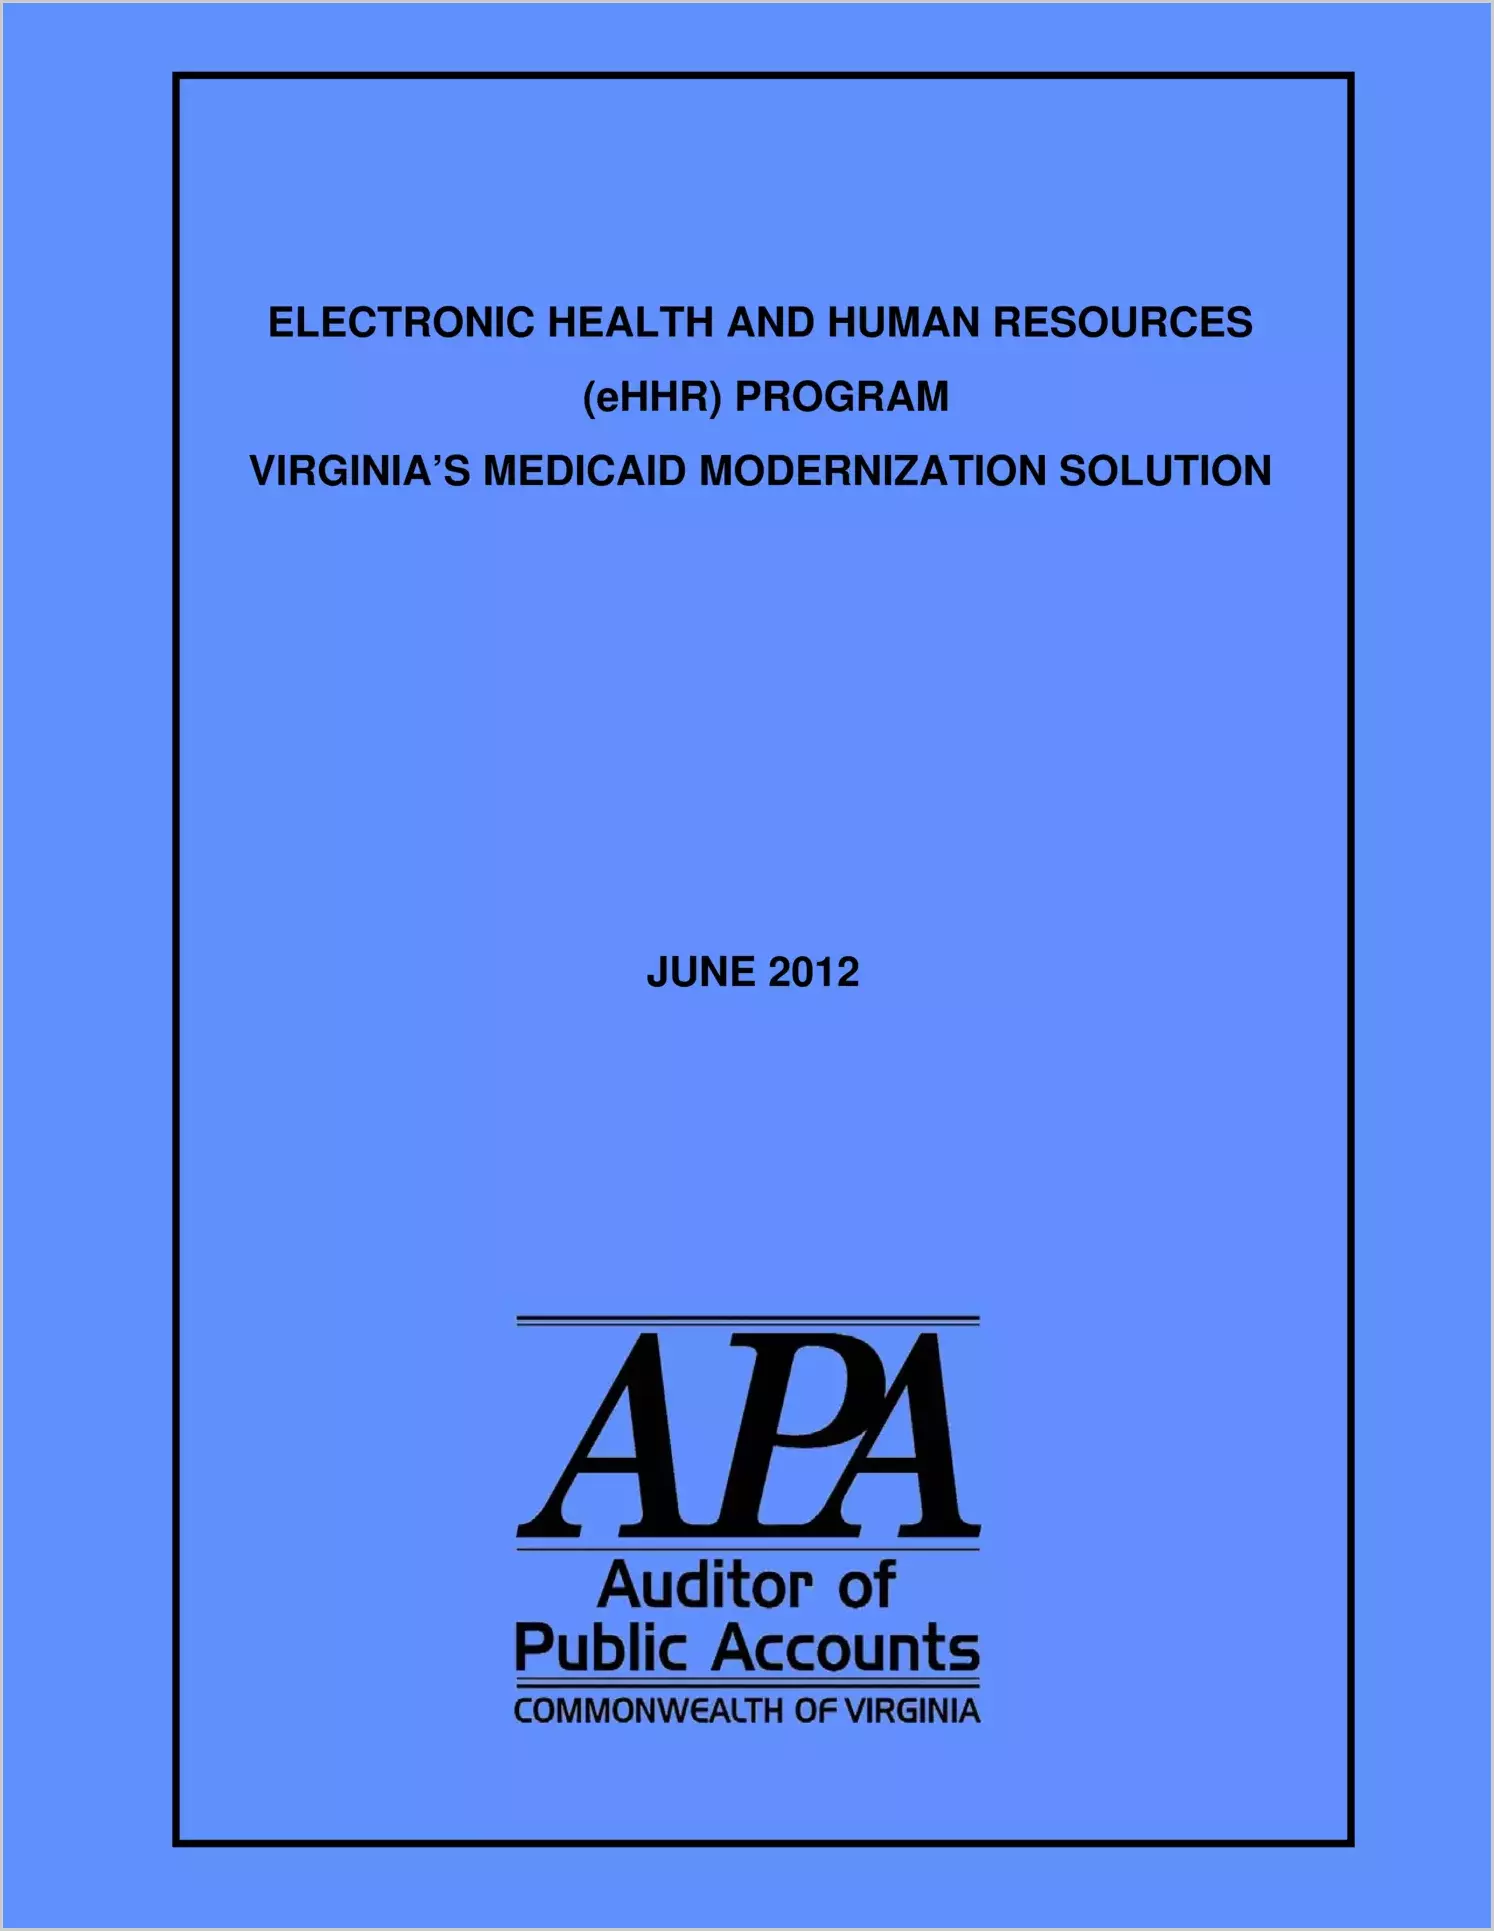 Electronic Health and Human Resources (eHHR) Program Virginia's Medicaid Modernization Solution as of June 2012